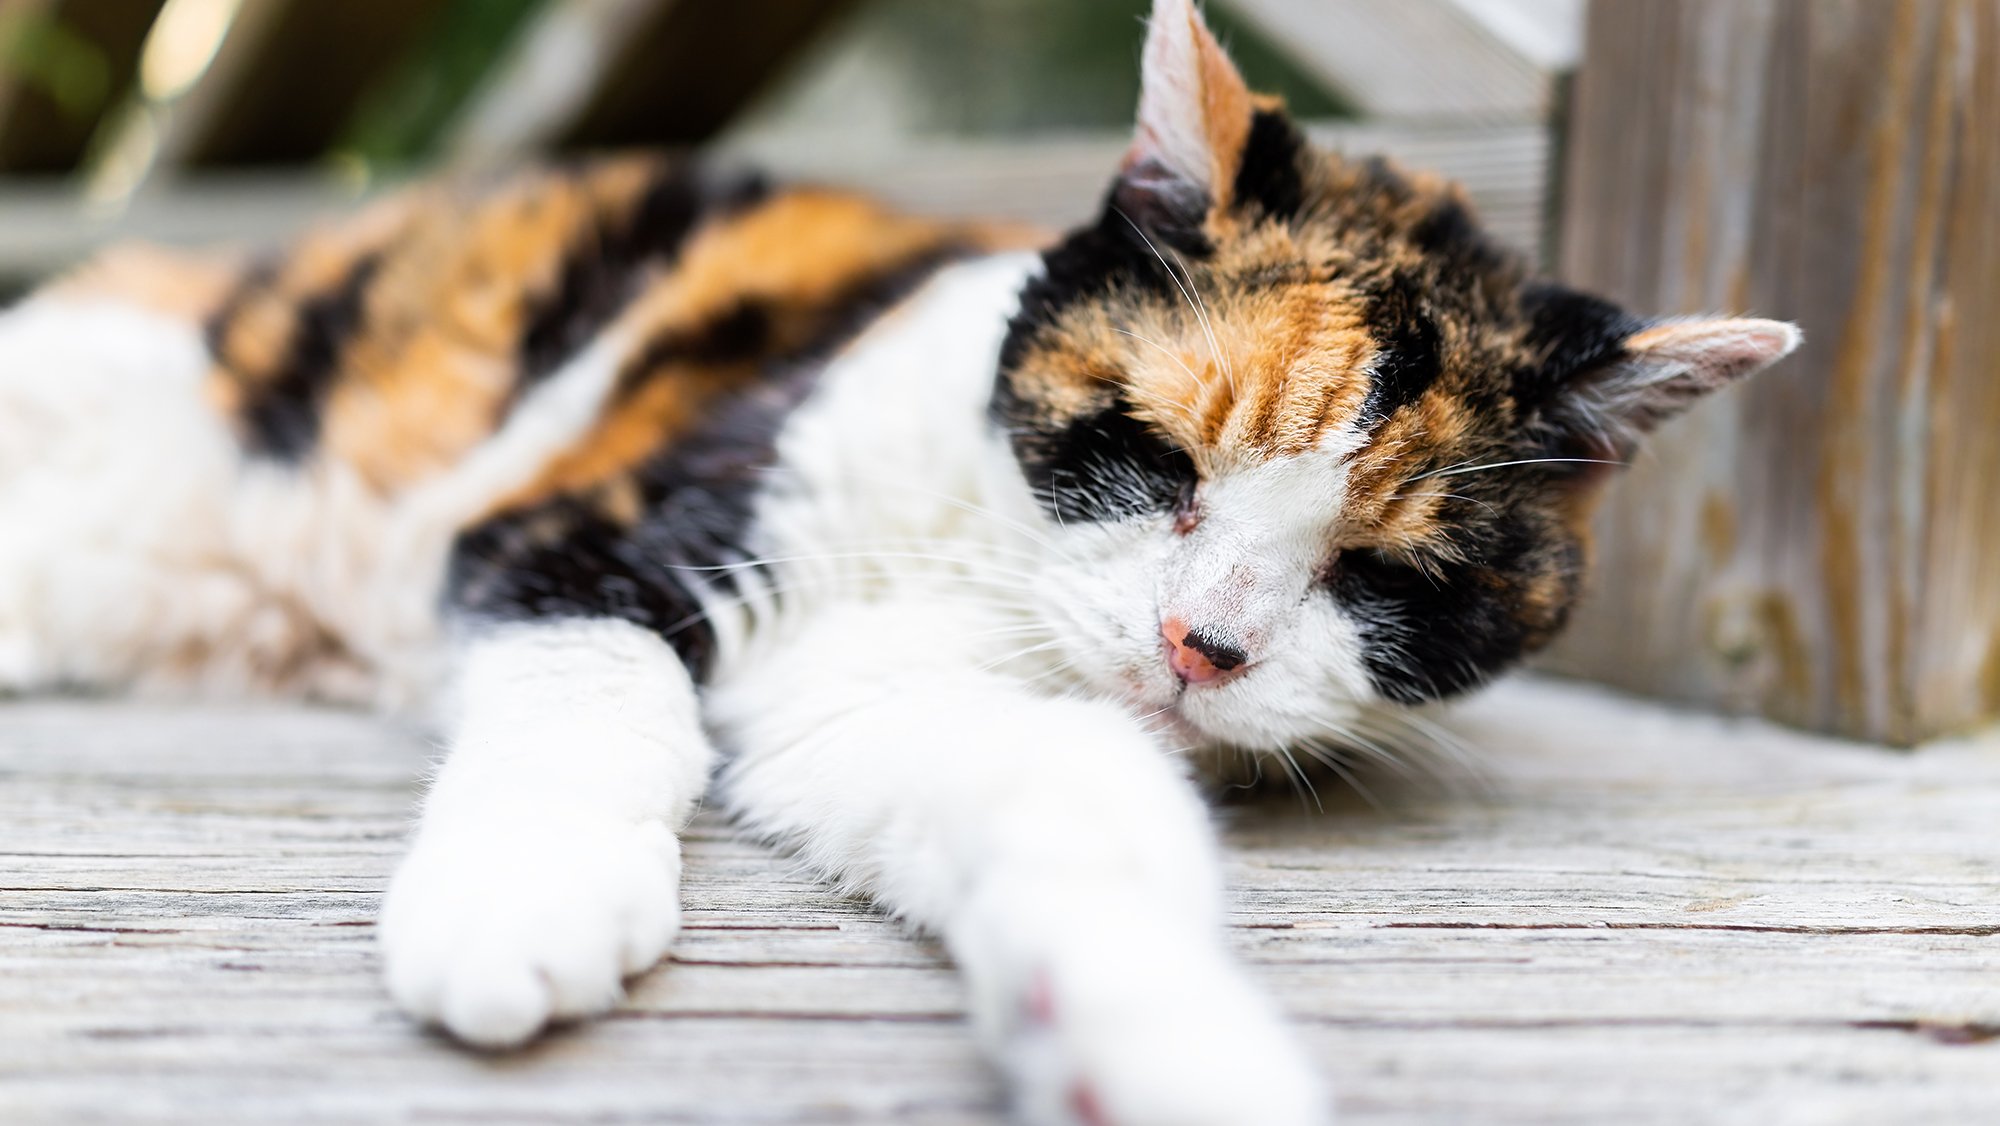 Why do some cats seem to get along with other cats? Their hormones